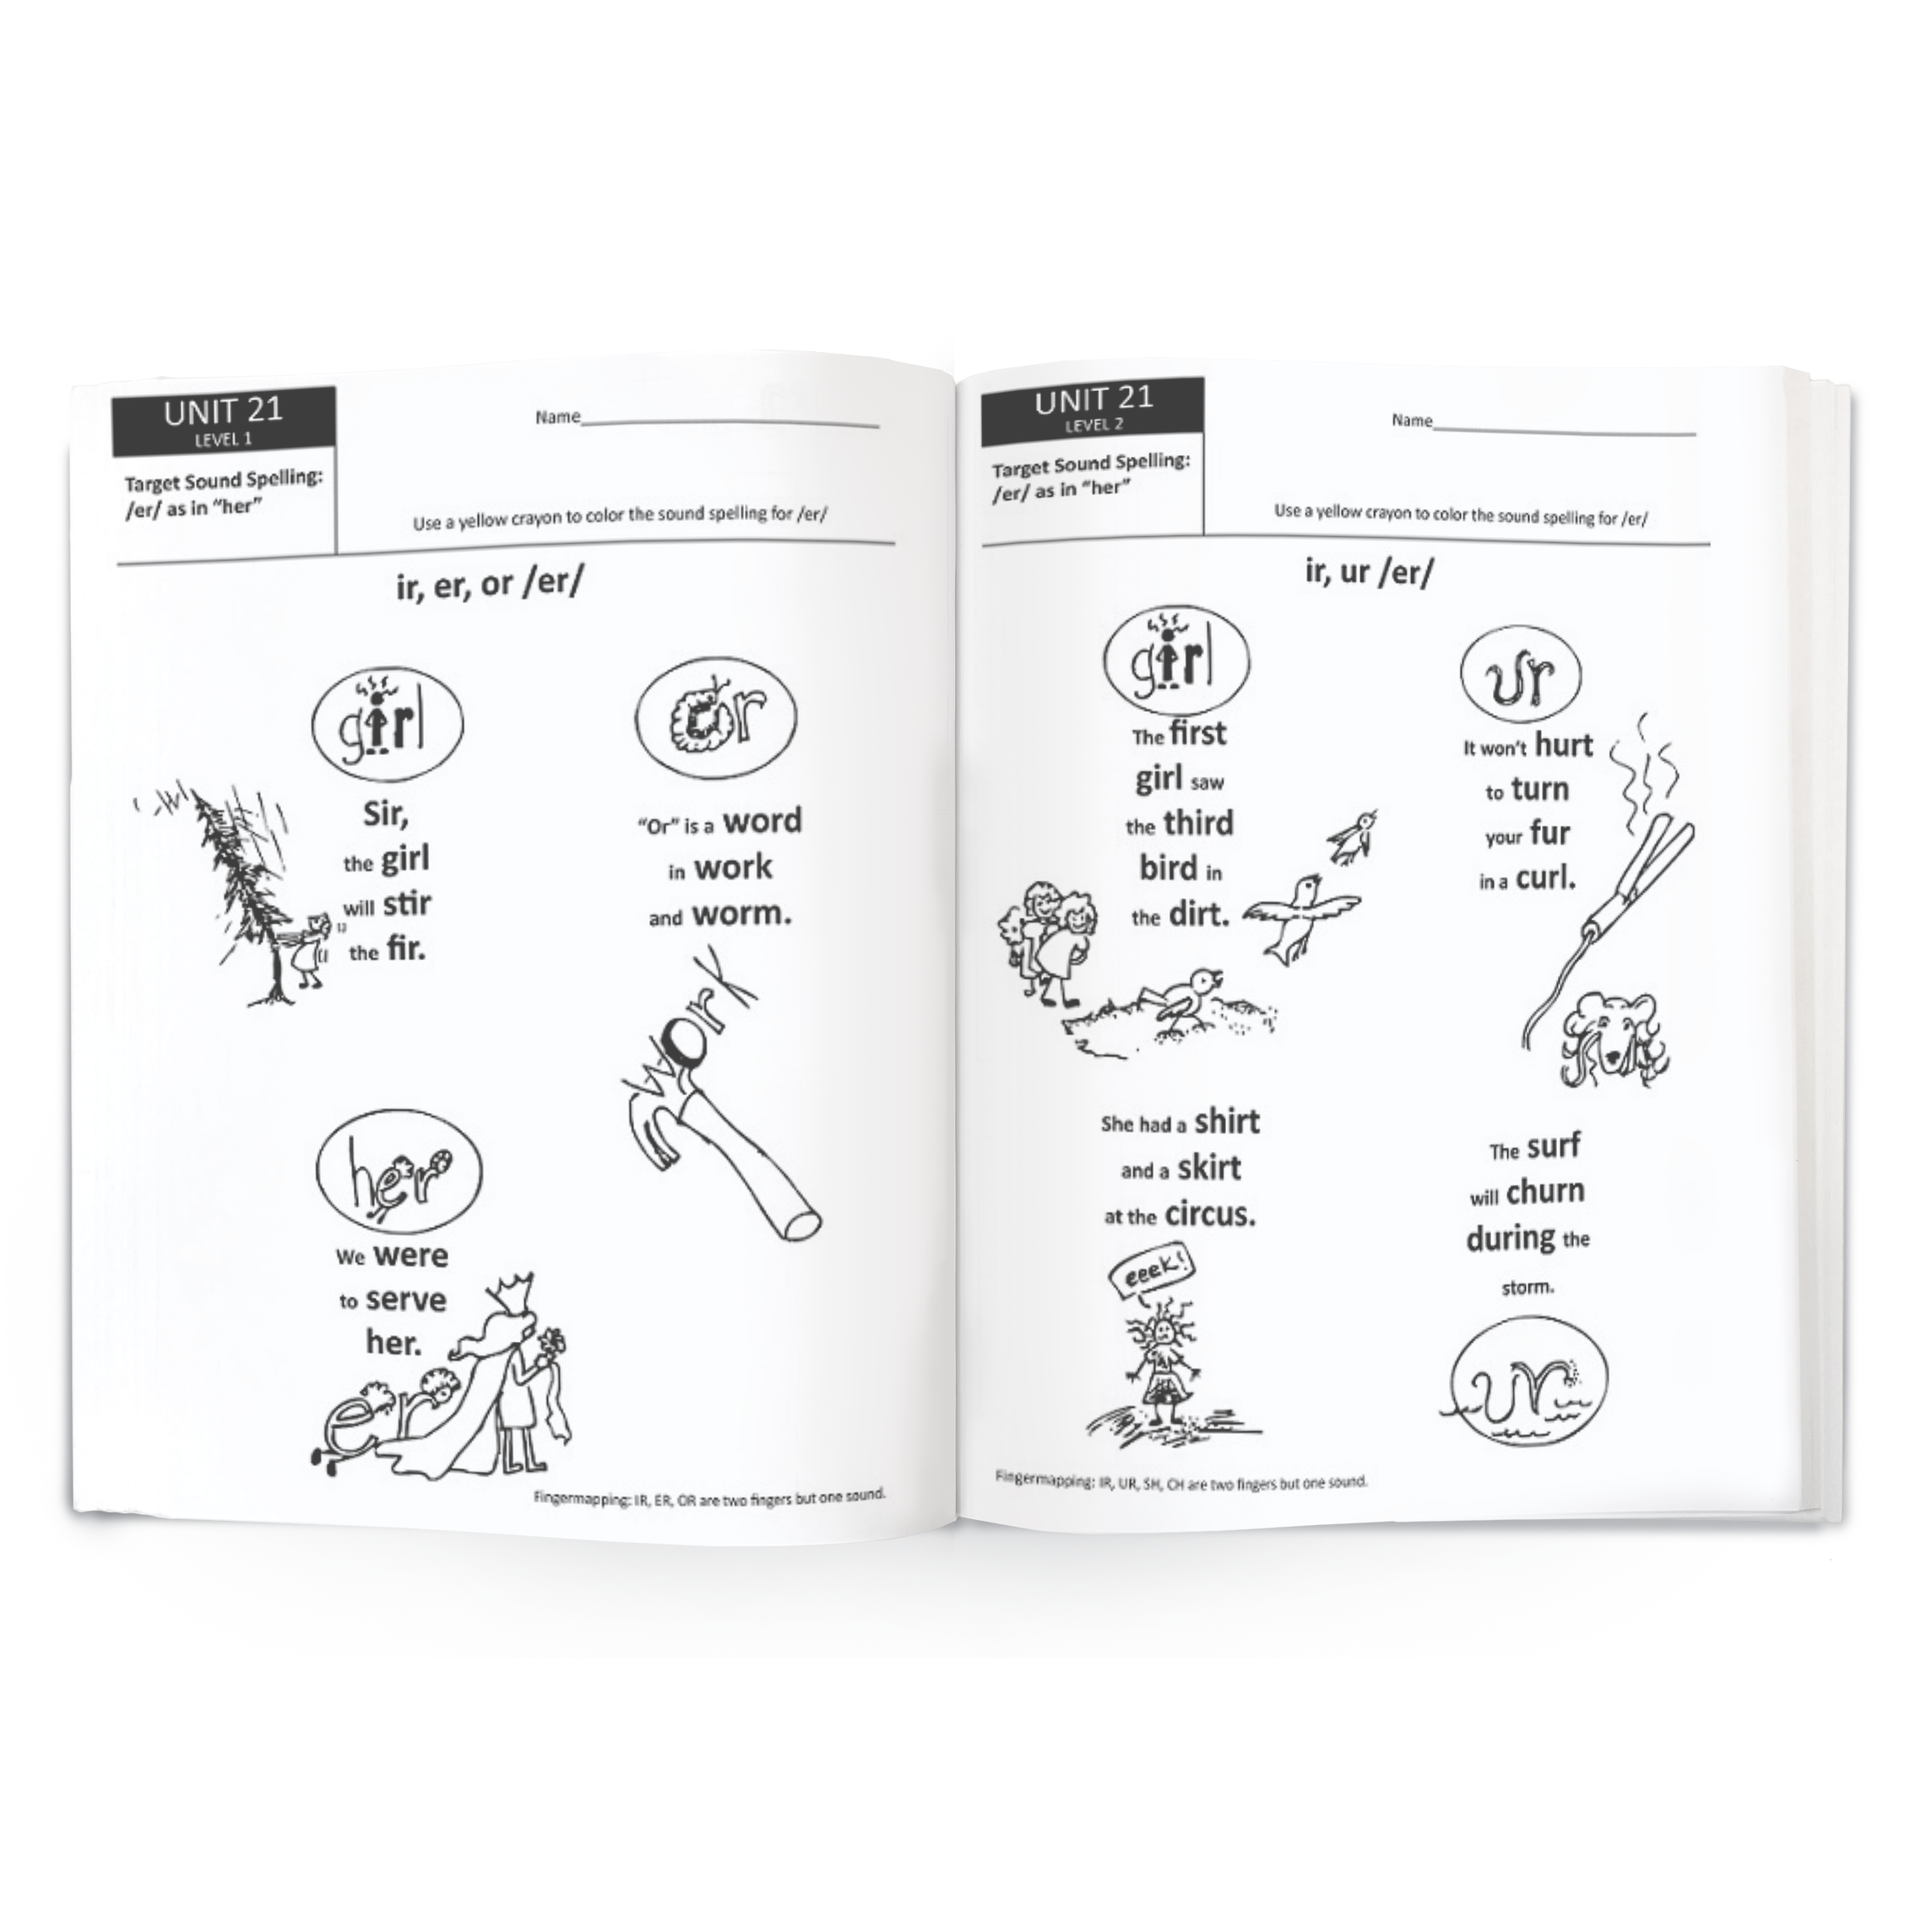 The Illustrated Book of Sounds & Their Spelling Patterns, 3rd Ed.